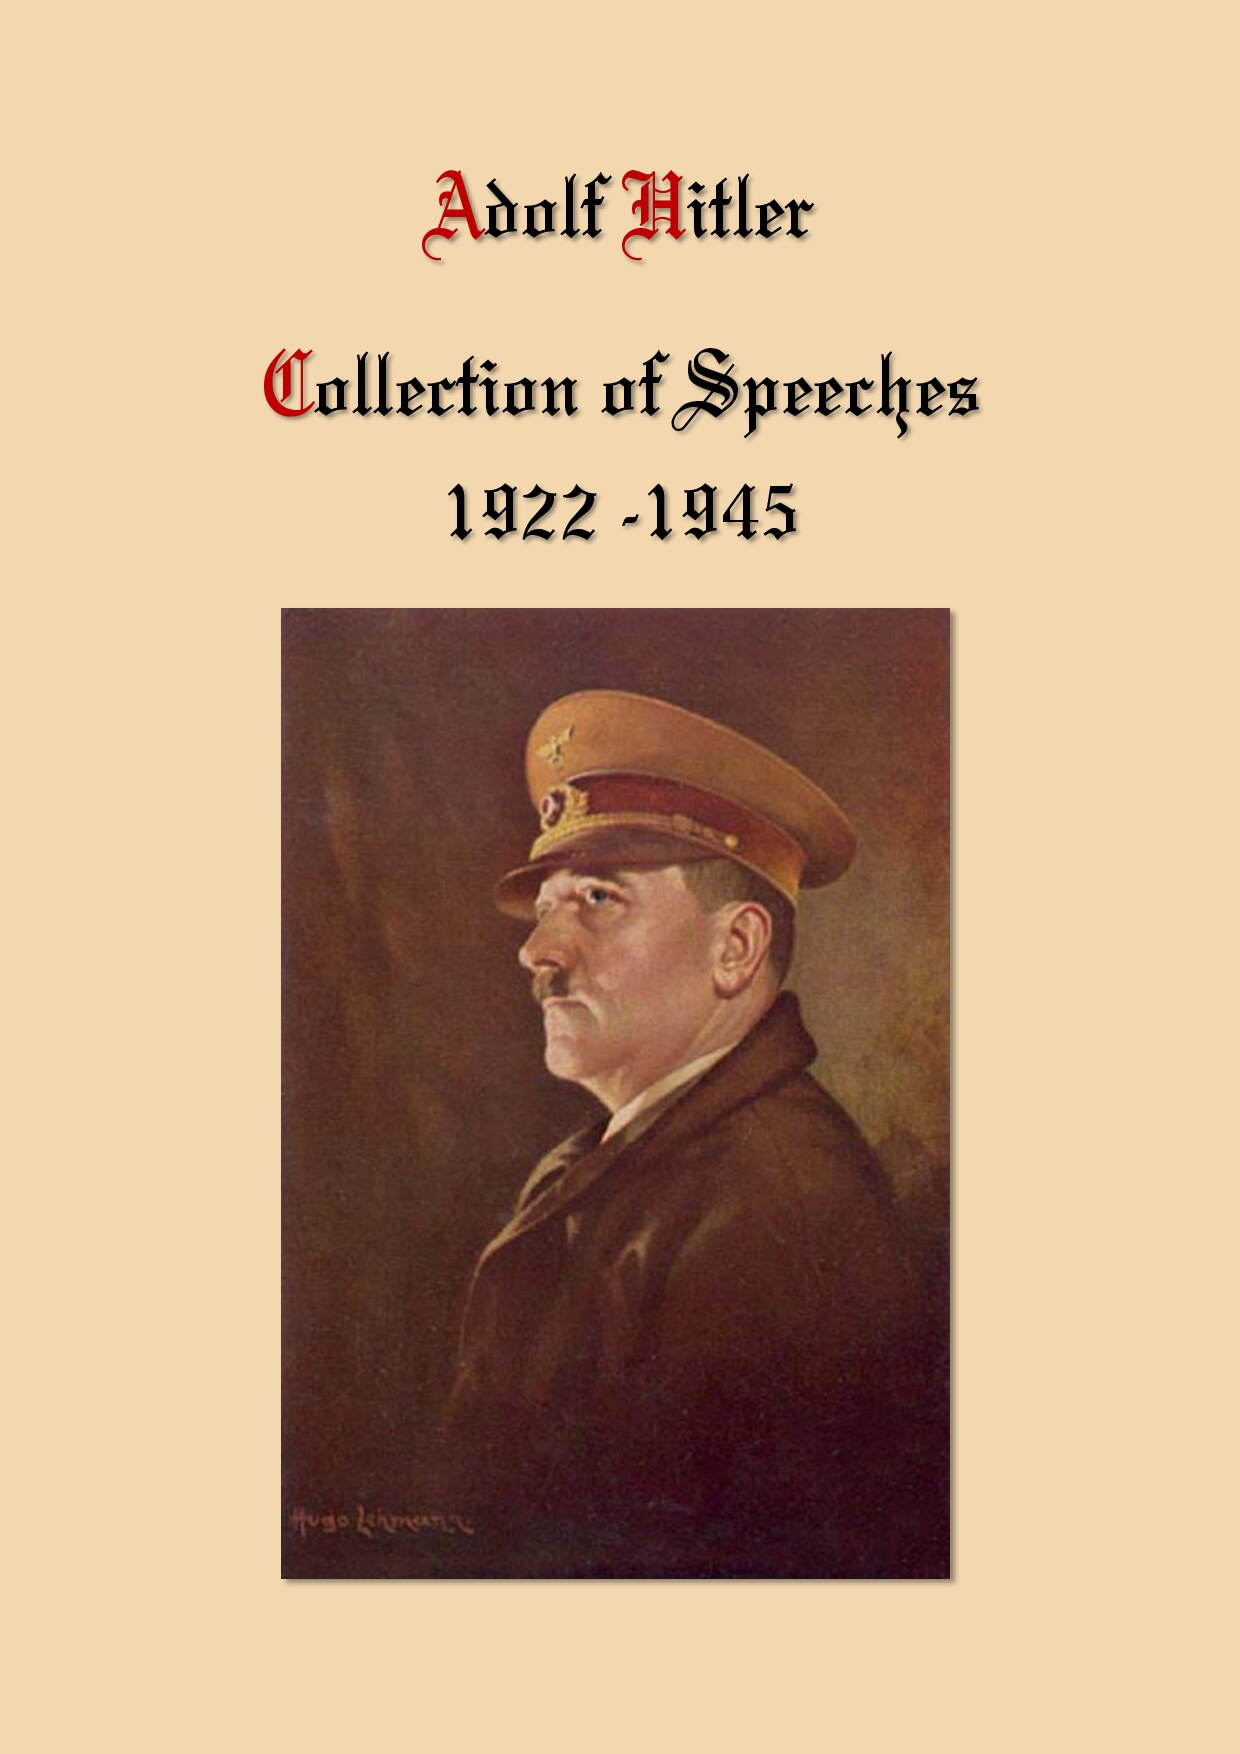 Collection of Speeches: 1922-1945